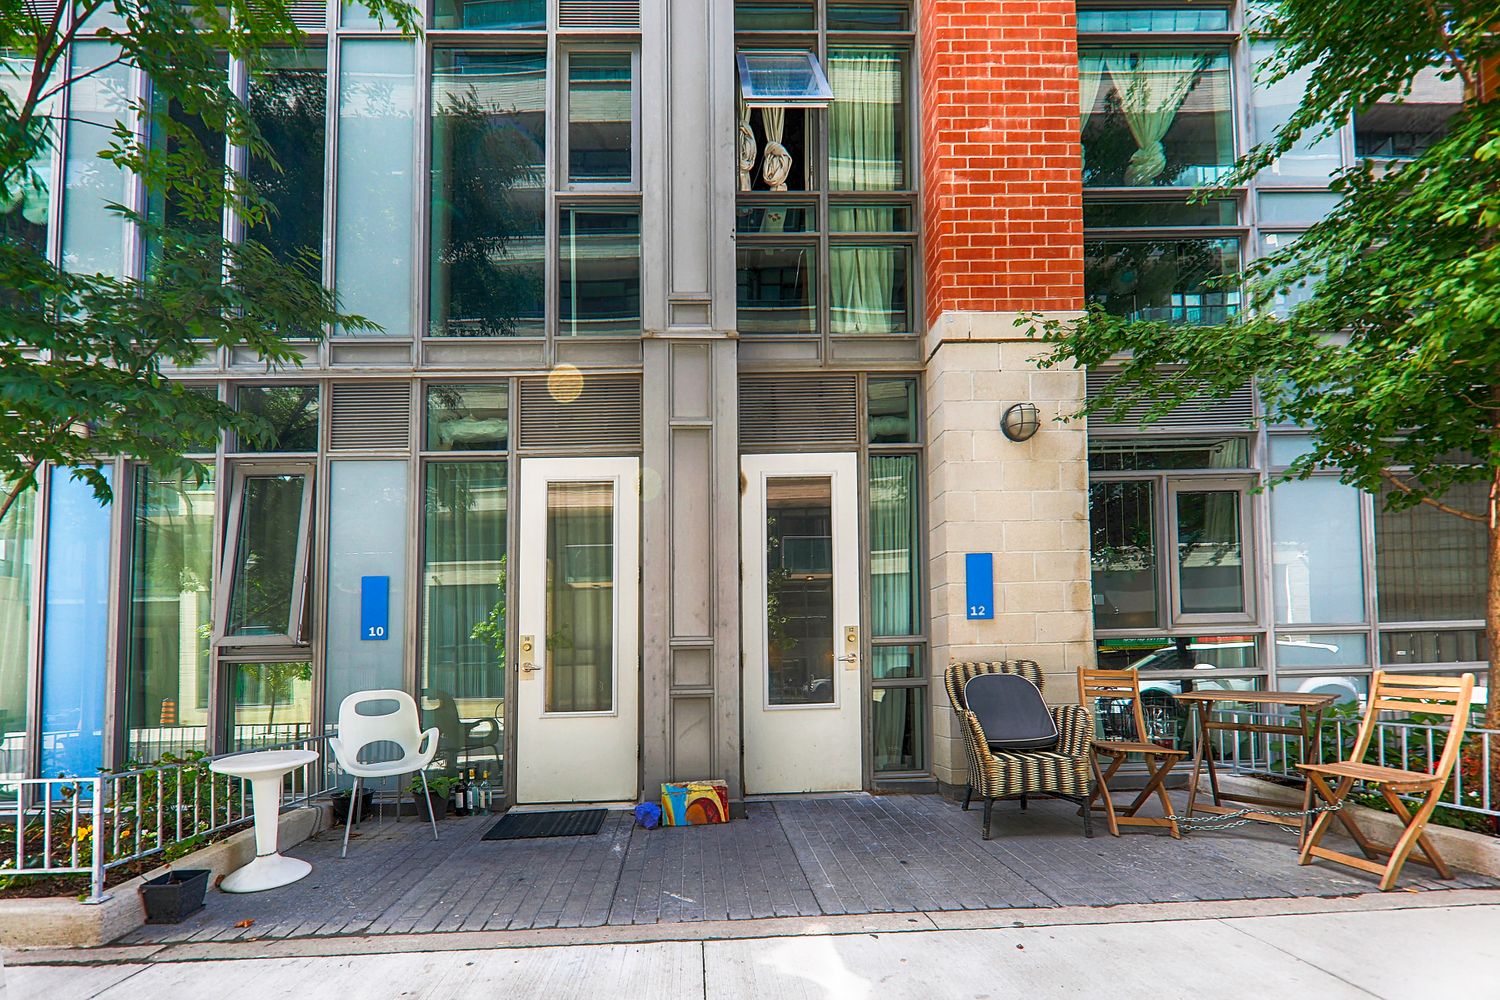 8-38 Abell Street. Artscape Triangle Lofts is located in  West End, Toronto - image #3 of 4